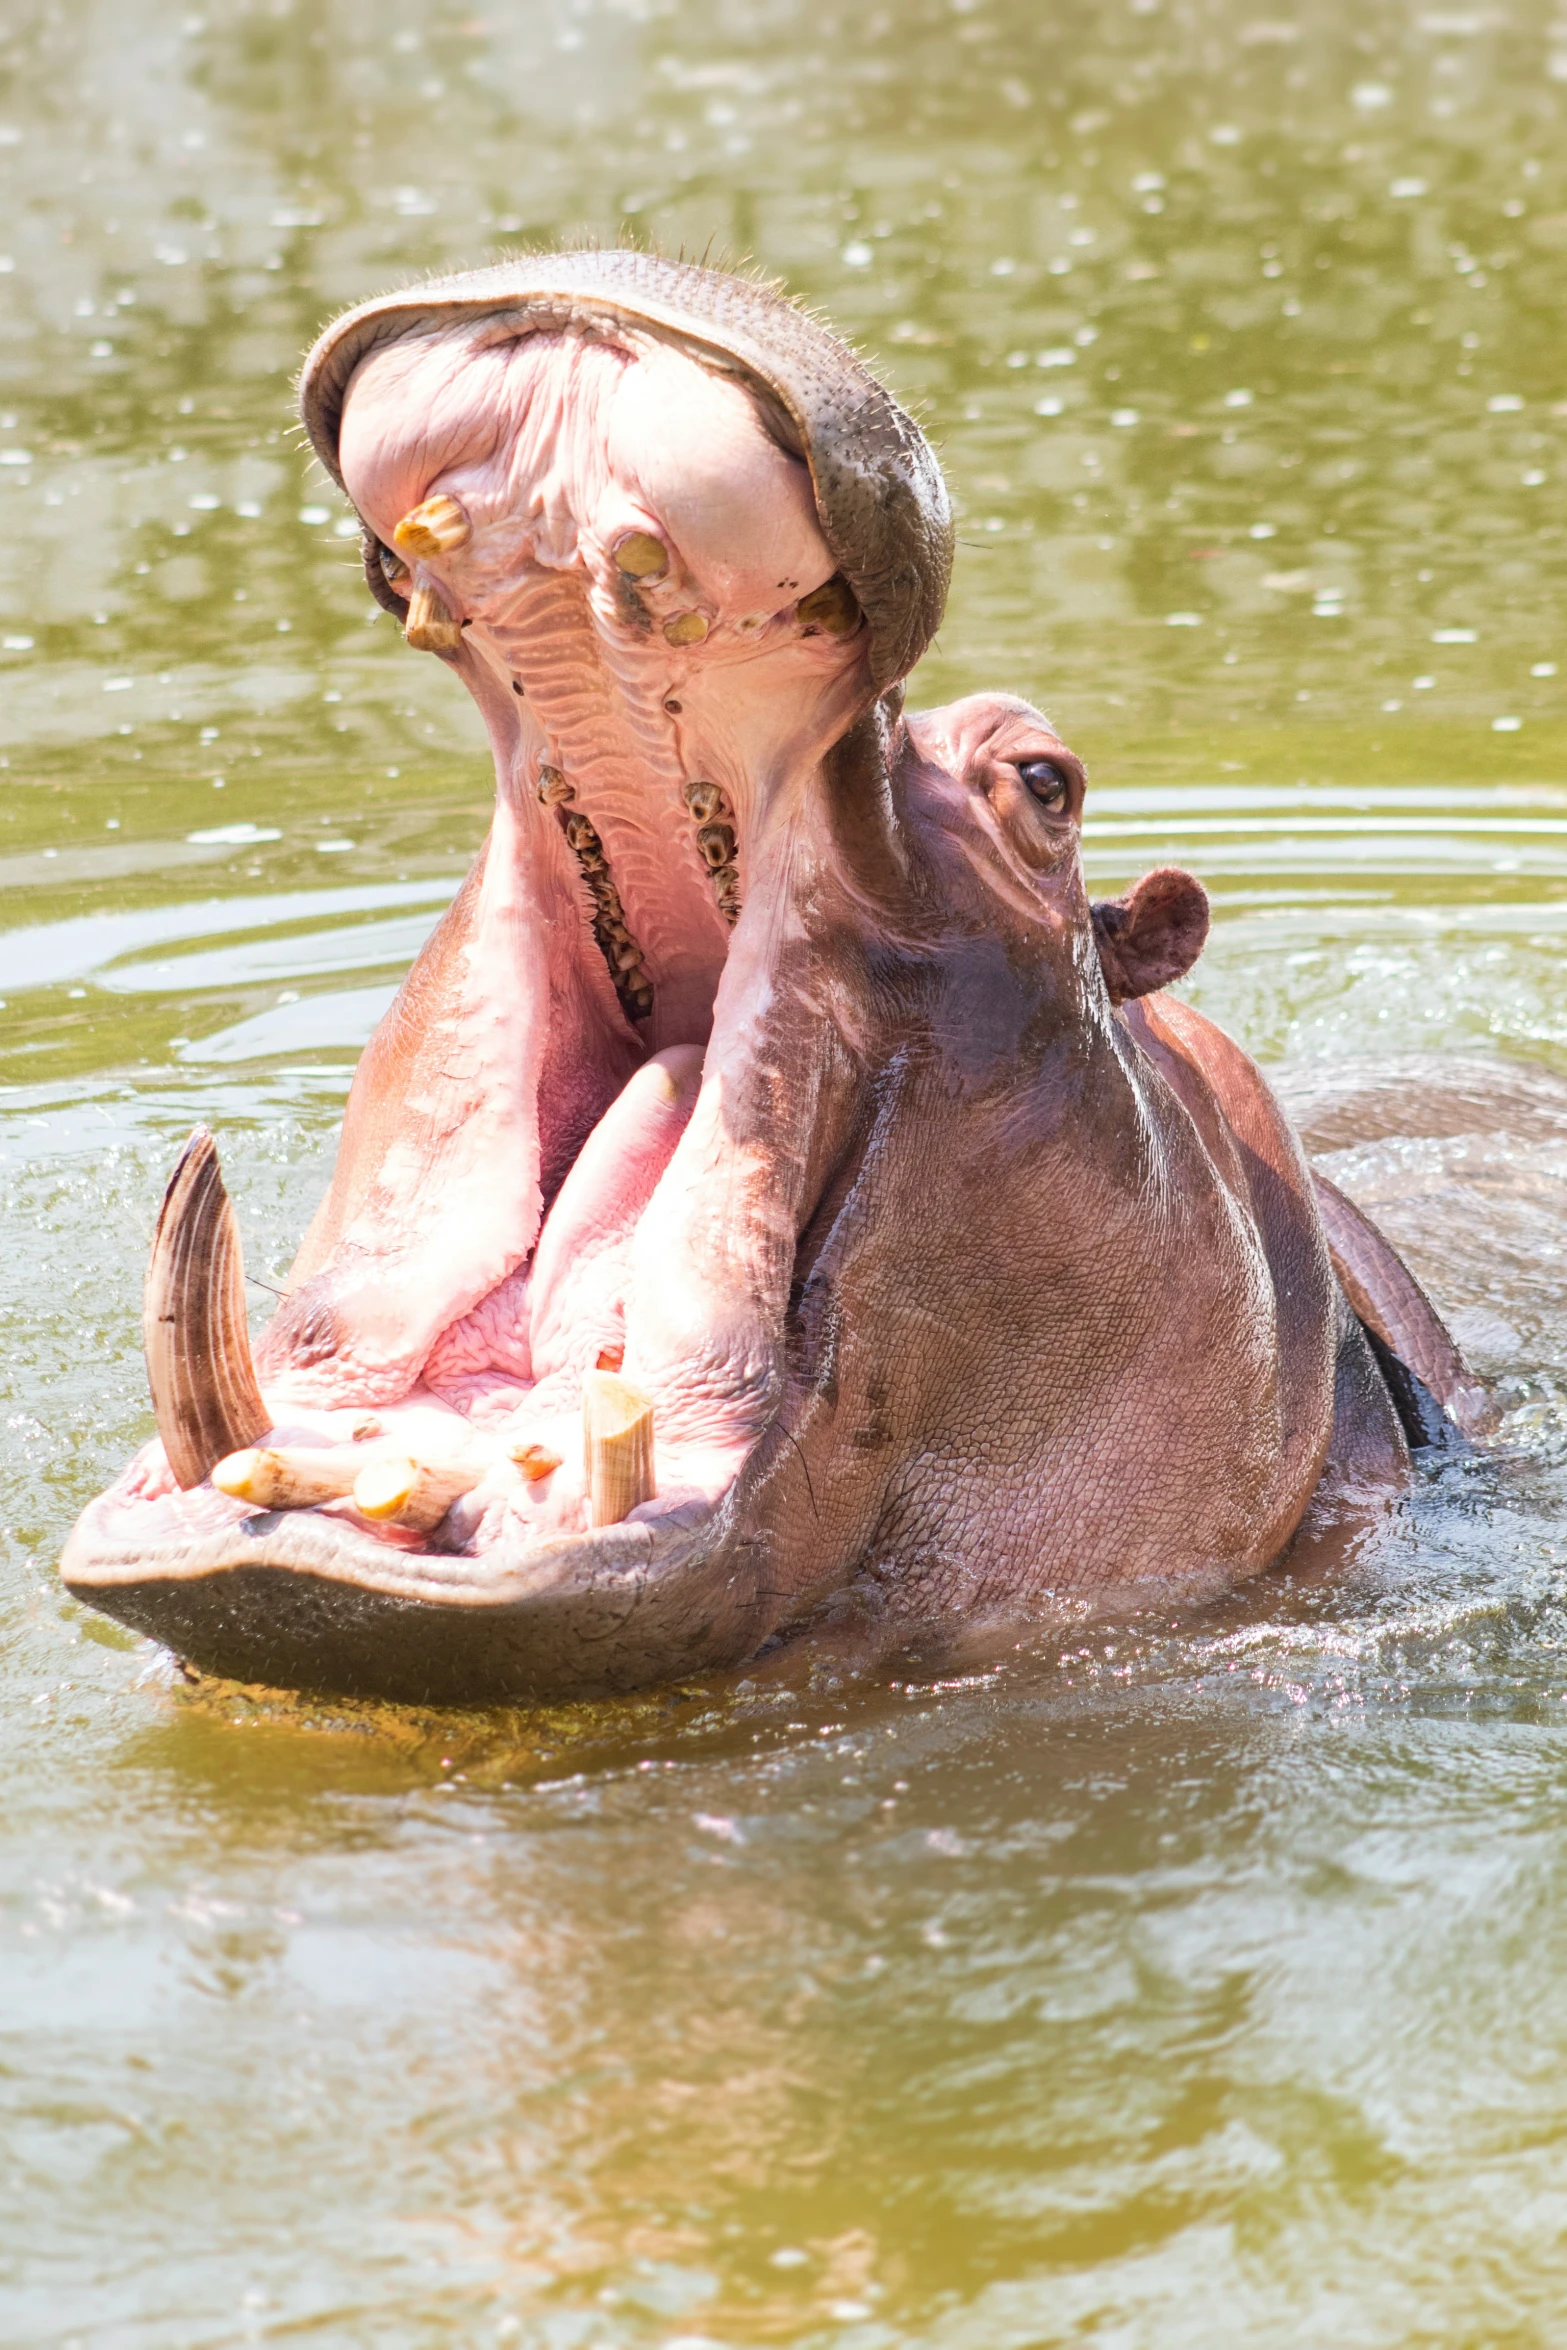 the hippopotamus has its mouth open and it's head covered in a hat